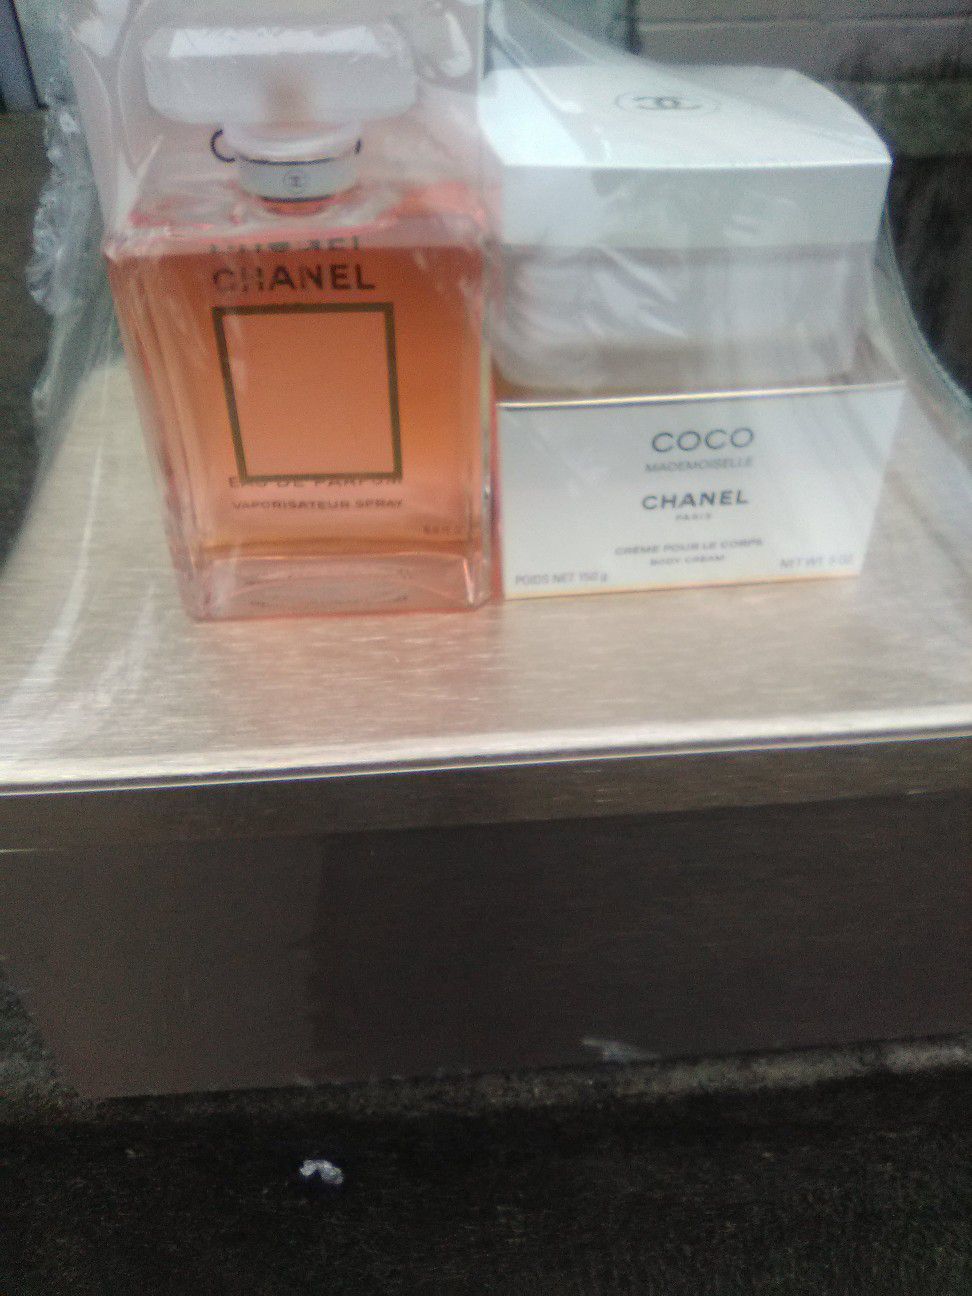 COCO Chanel, Chanel Bleu Men's, Jimmy Cho, Miss Dior and more